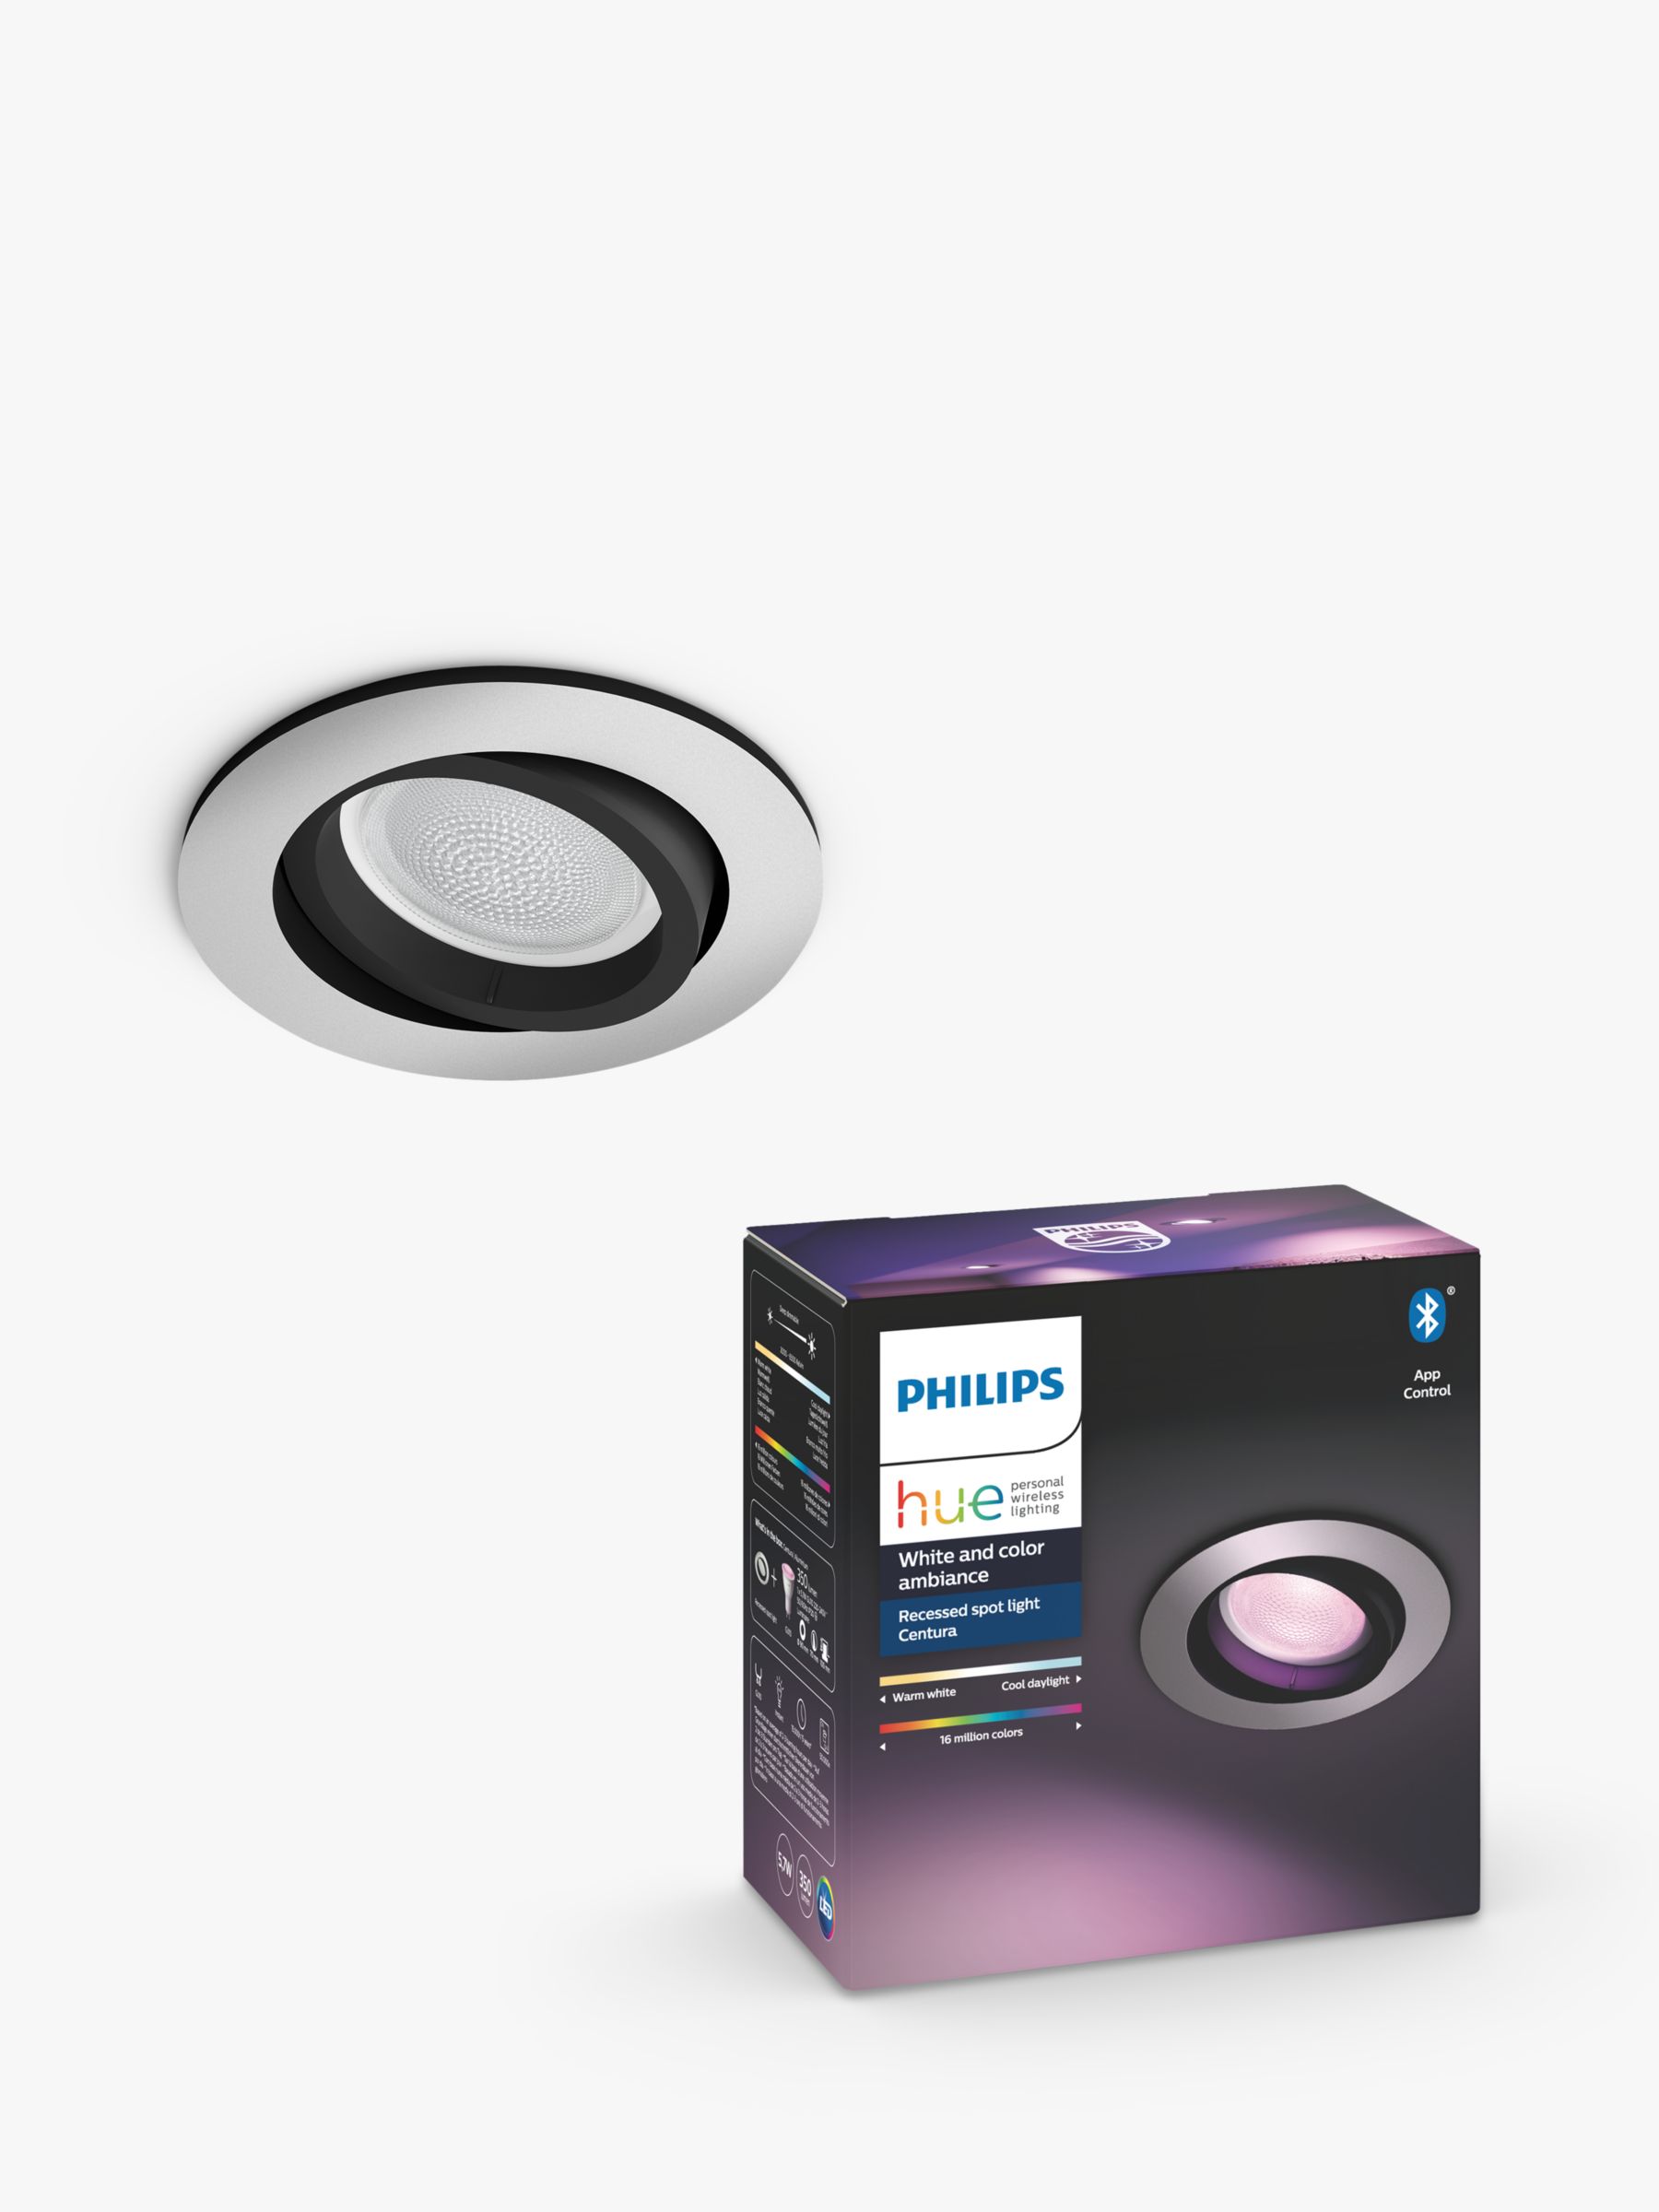 Philips Hue White and Colour Ambiance Centura LED Smart Recessed Spotlight with Bluetooth,